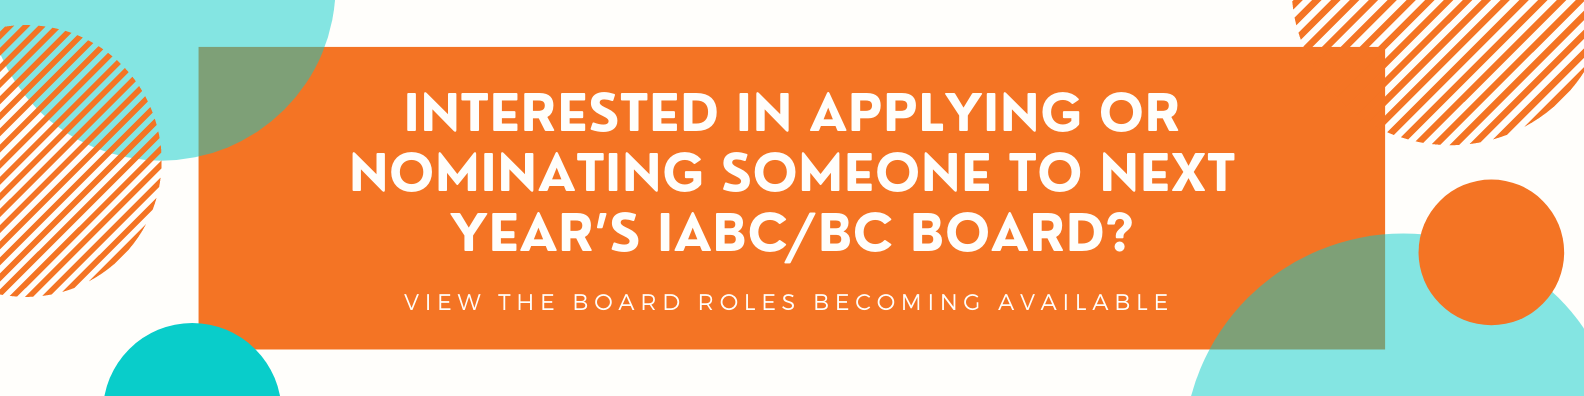 Apply for the IABC/BC Board